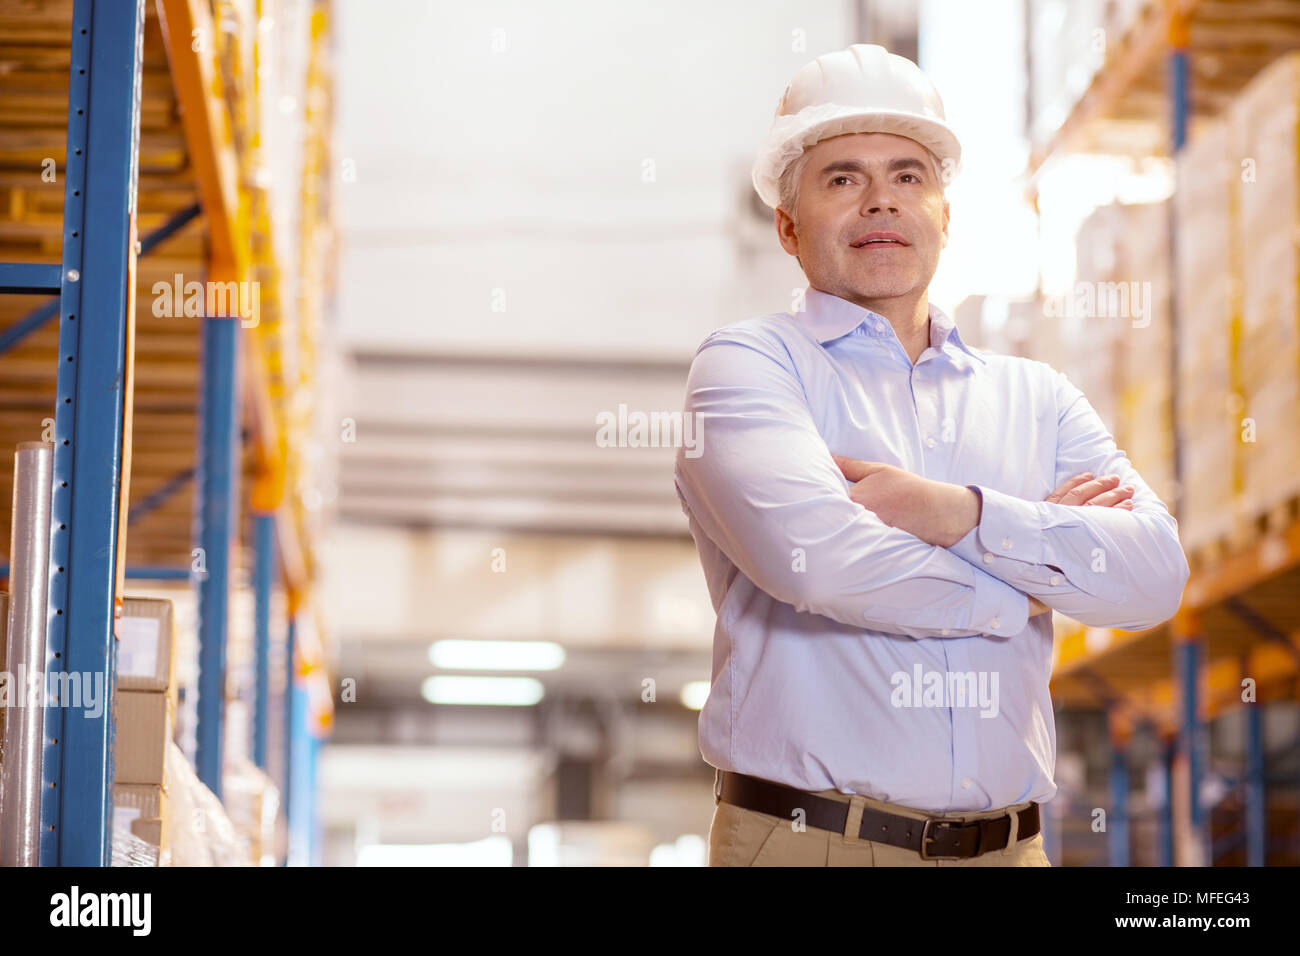 Smart logistics manager being at work Stock Photo